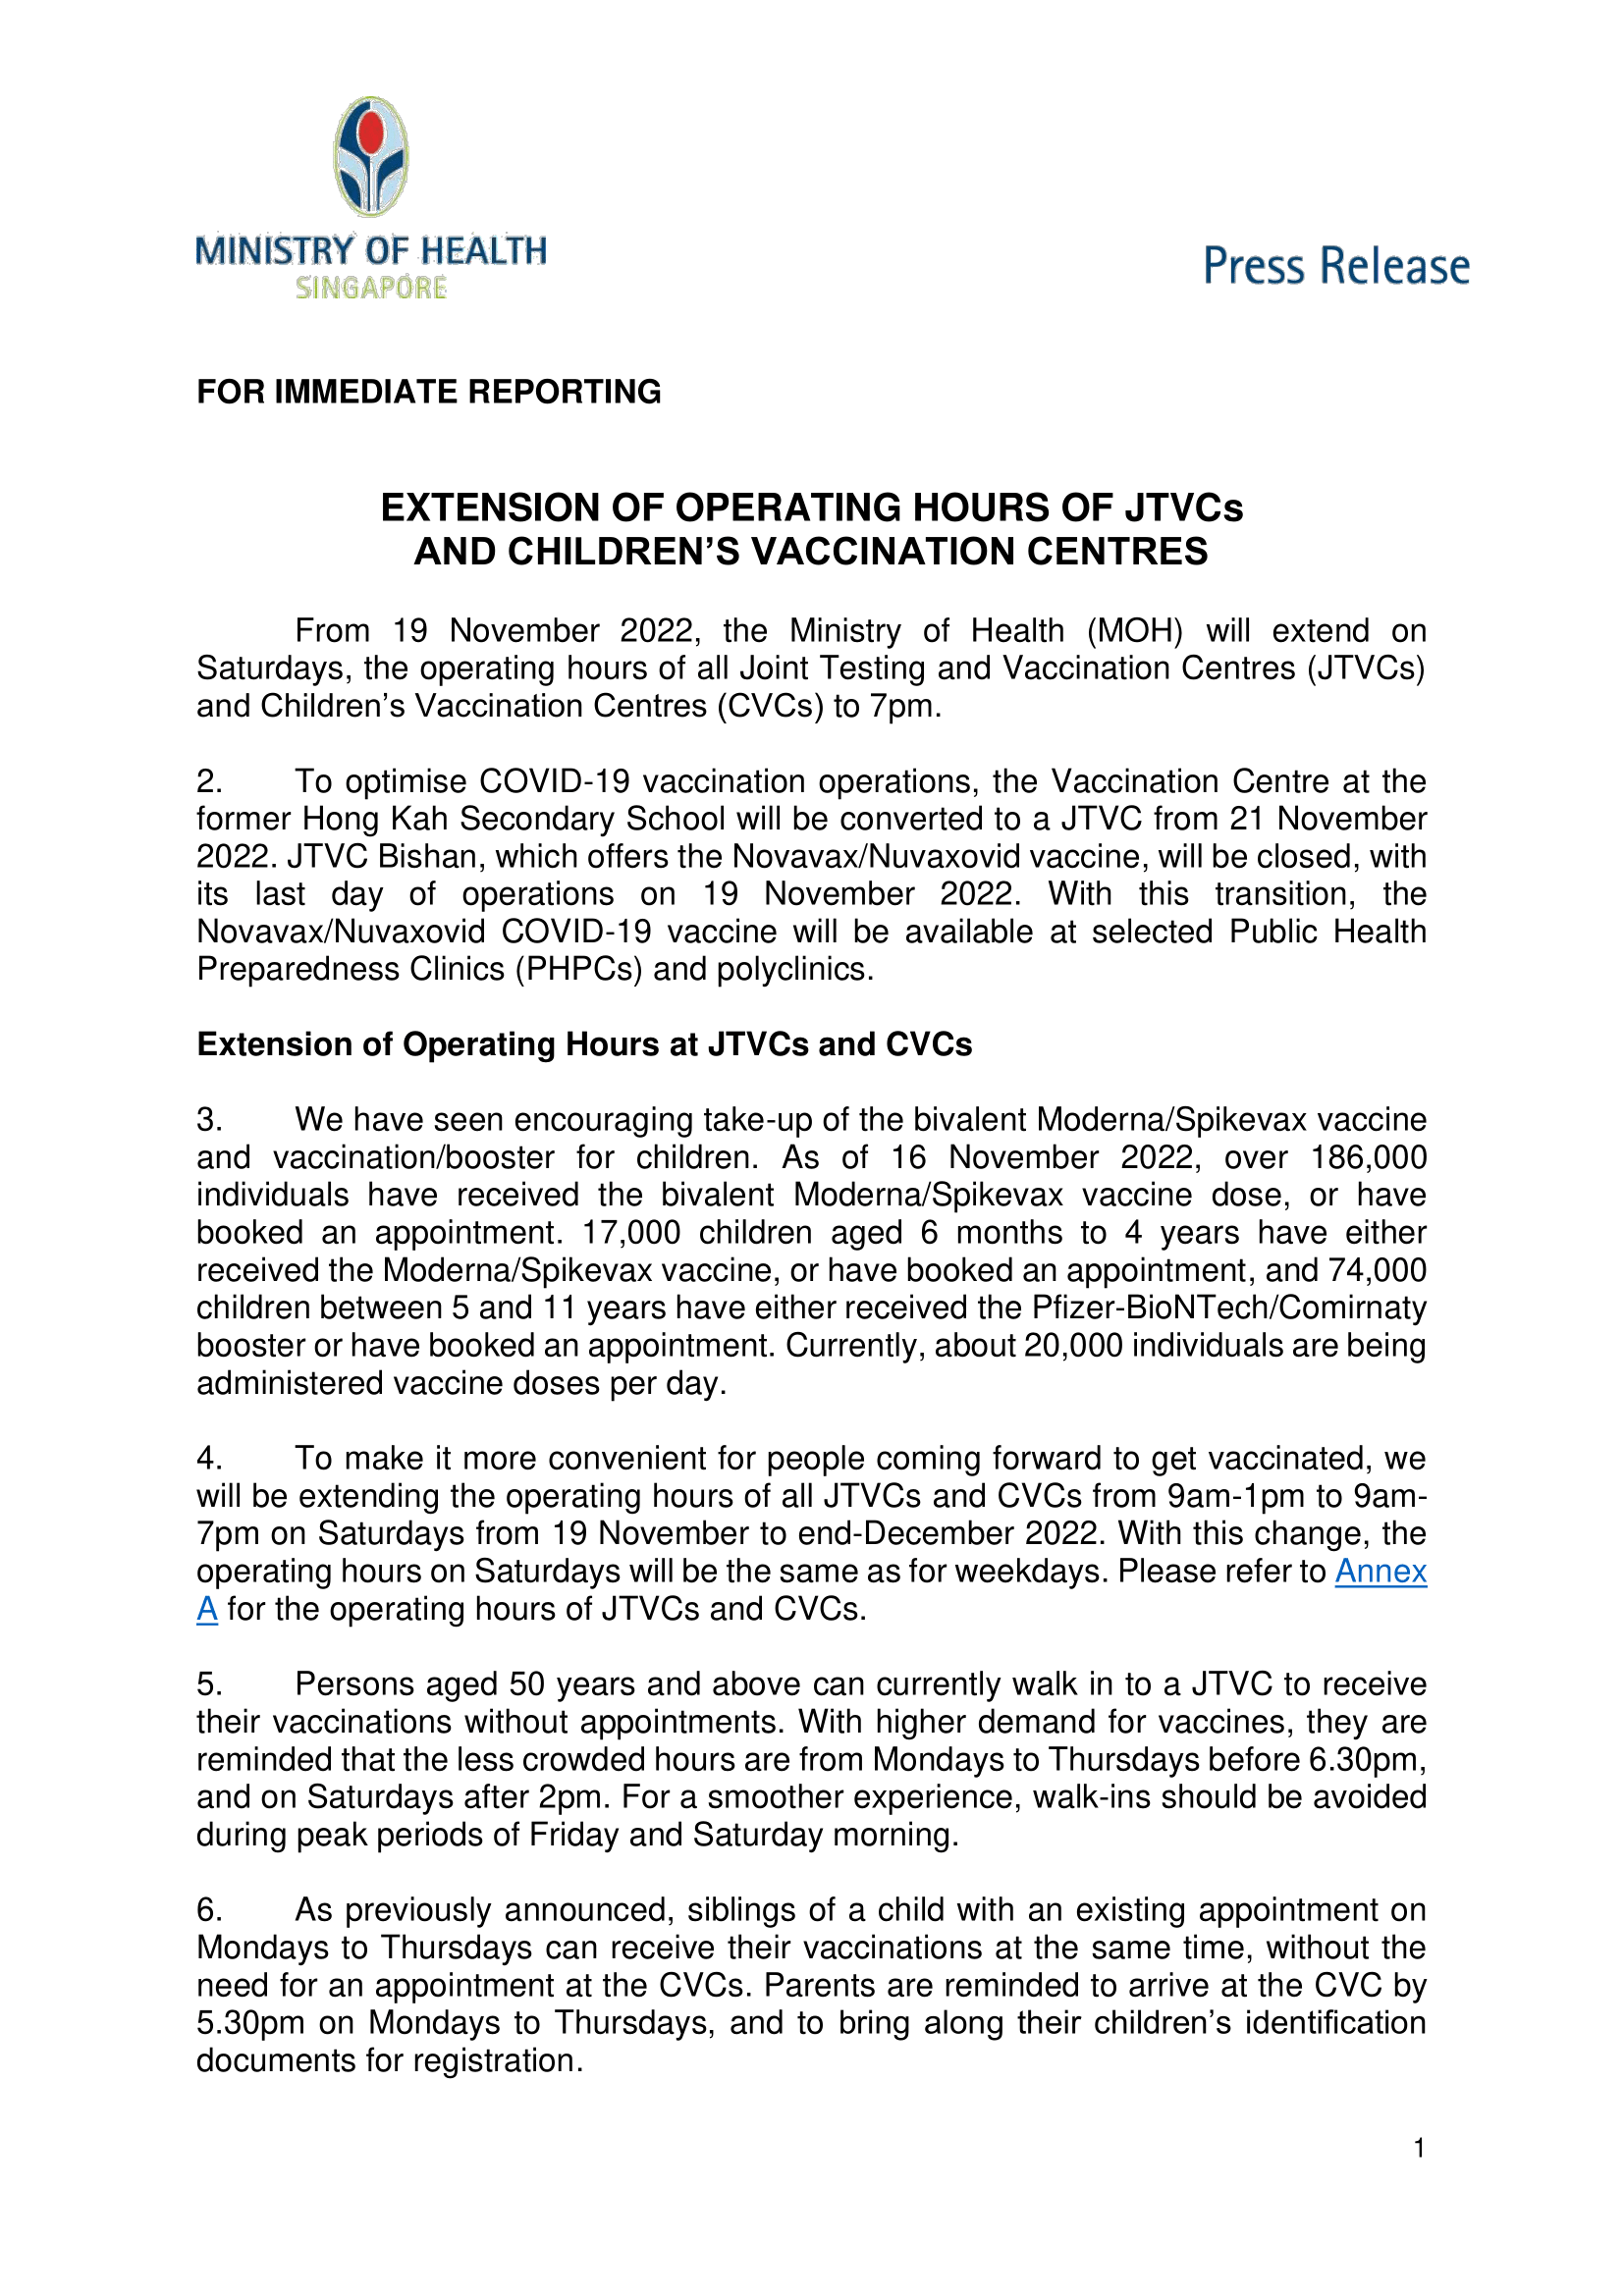 [MOH Connected] Press Release - Extension of Operating Hours of JTVCs and Childrens Vaccination Centres-1.png